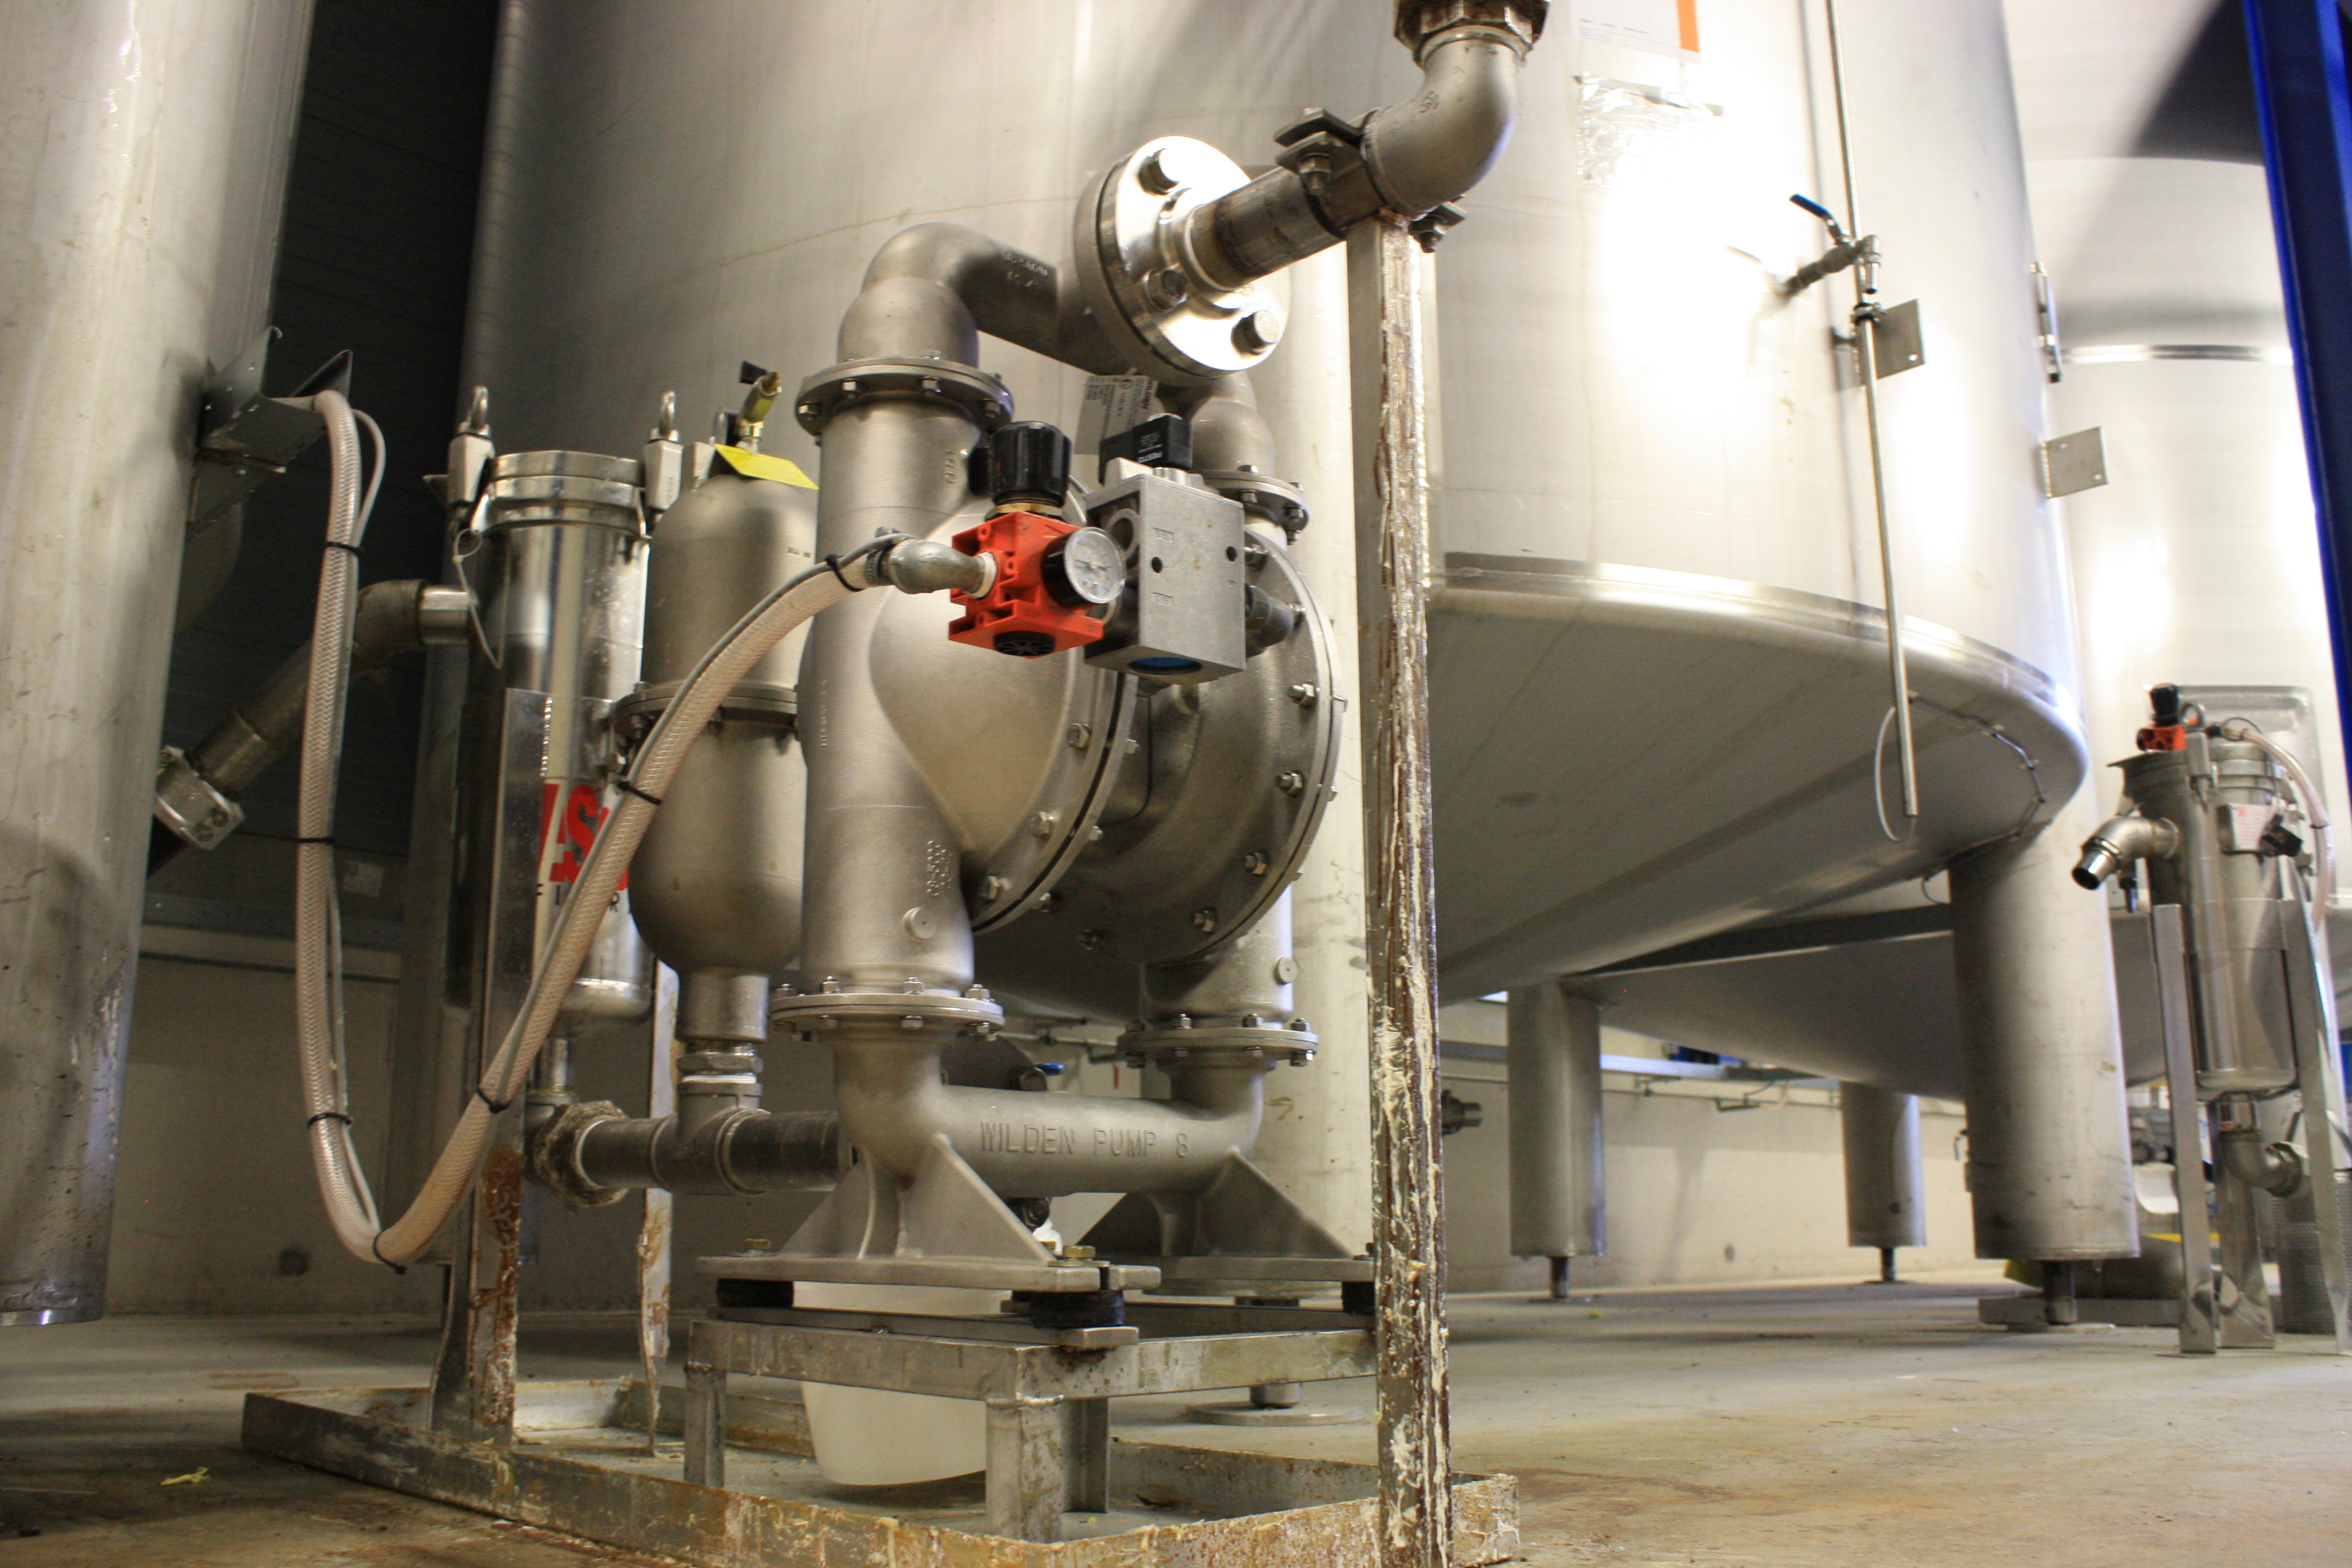 A stainless-steel Wilden Advanced PX Series AODD Pump in use at the SABA B.V. glue- and adhesive-manufacturing facility in the Netherlands.